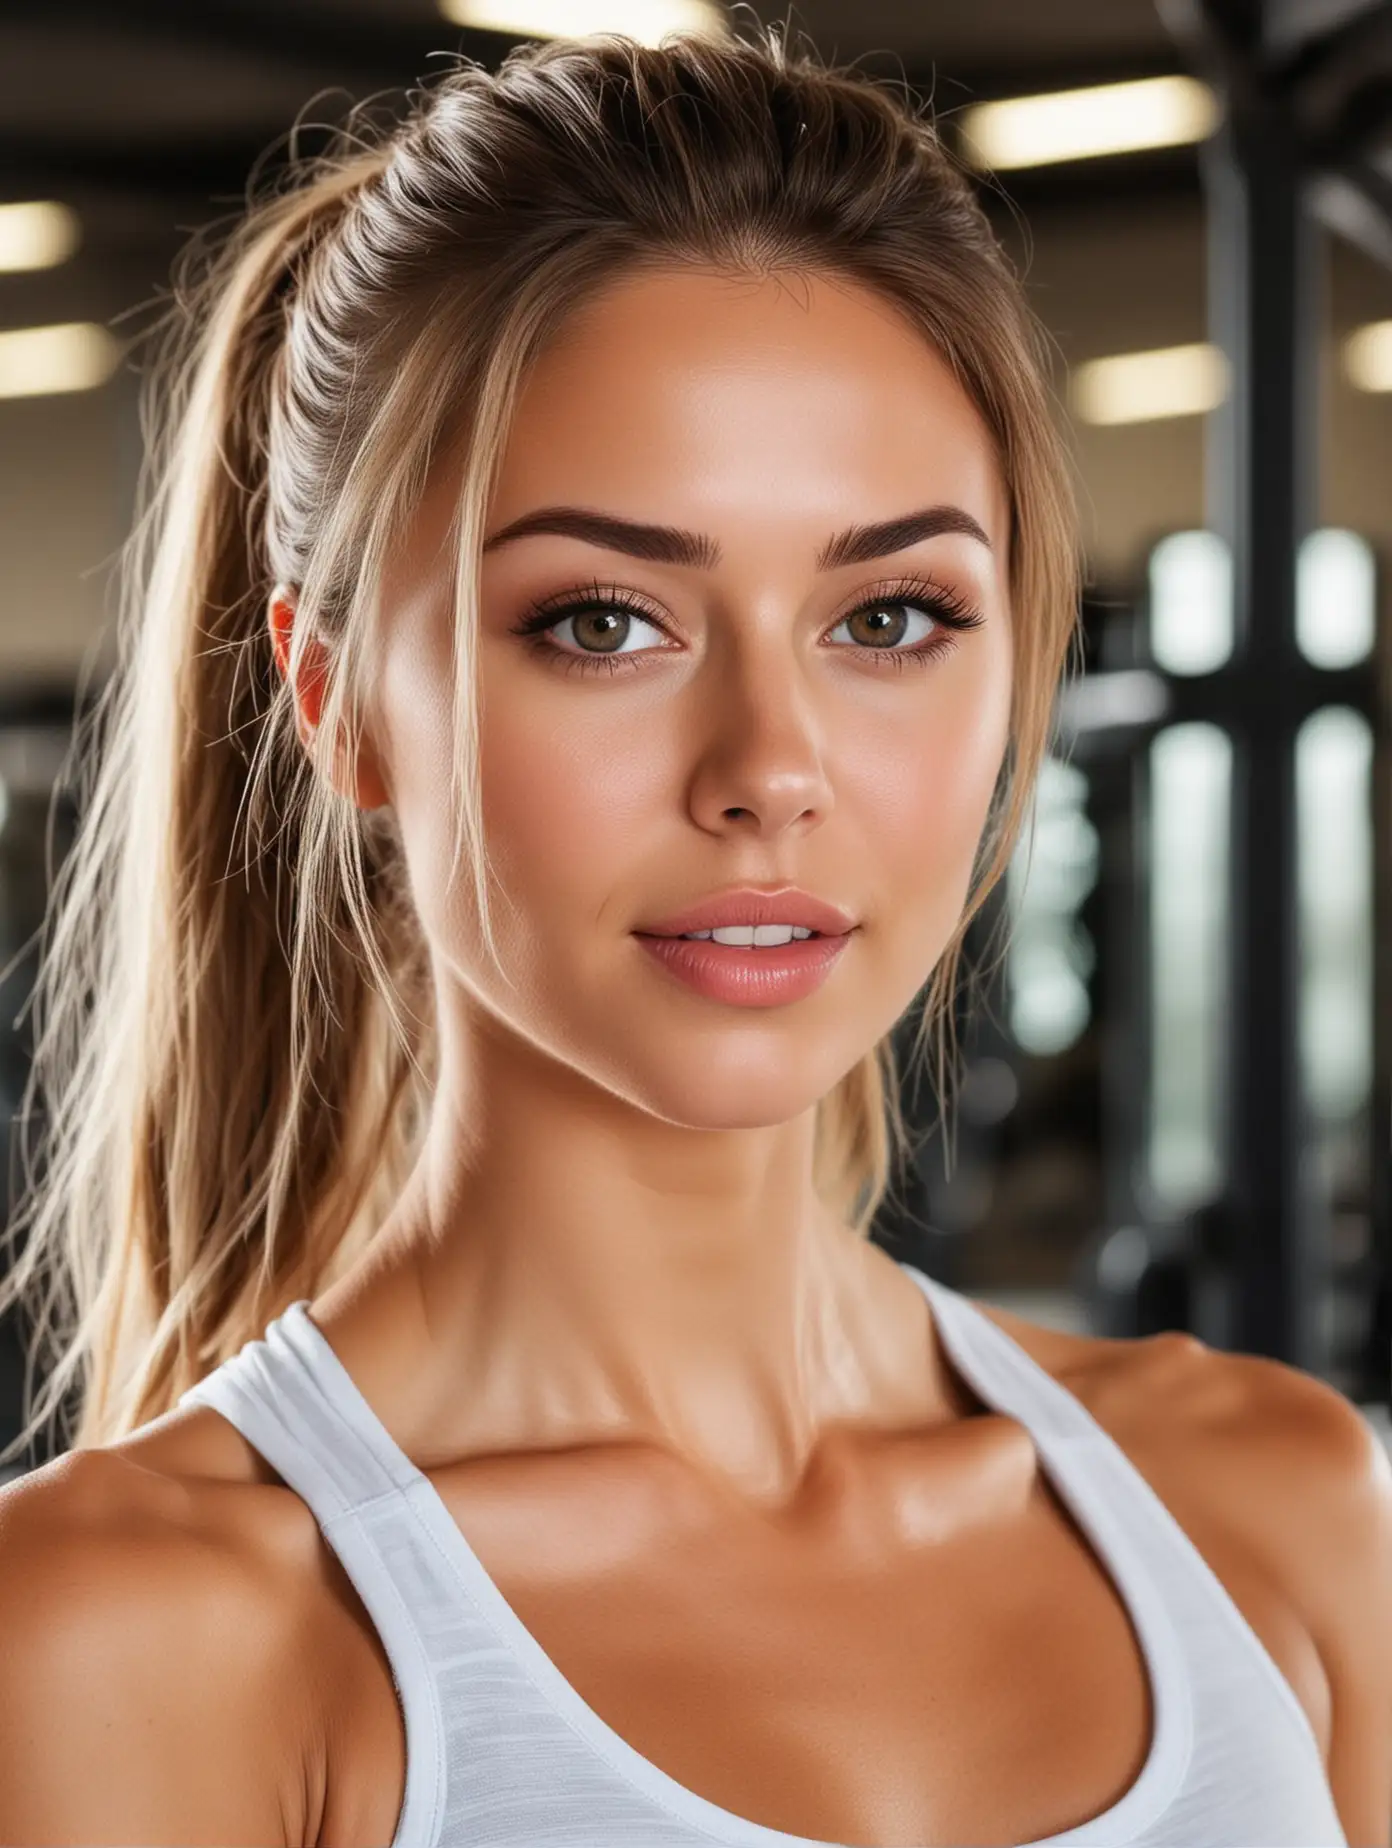 Fitness girl, exquisite facial features，Gym background,